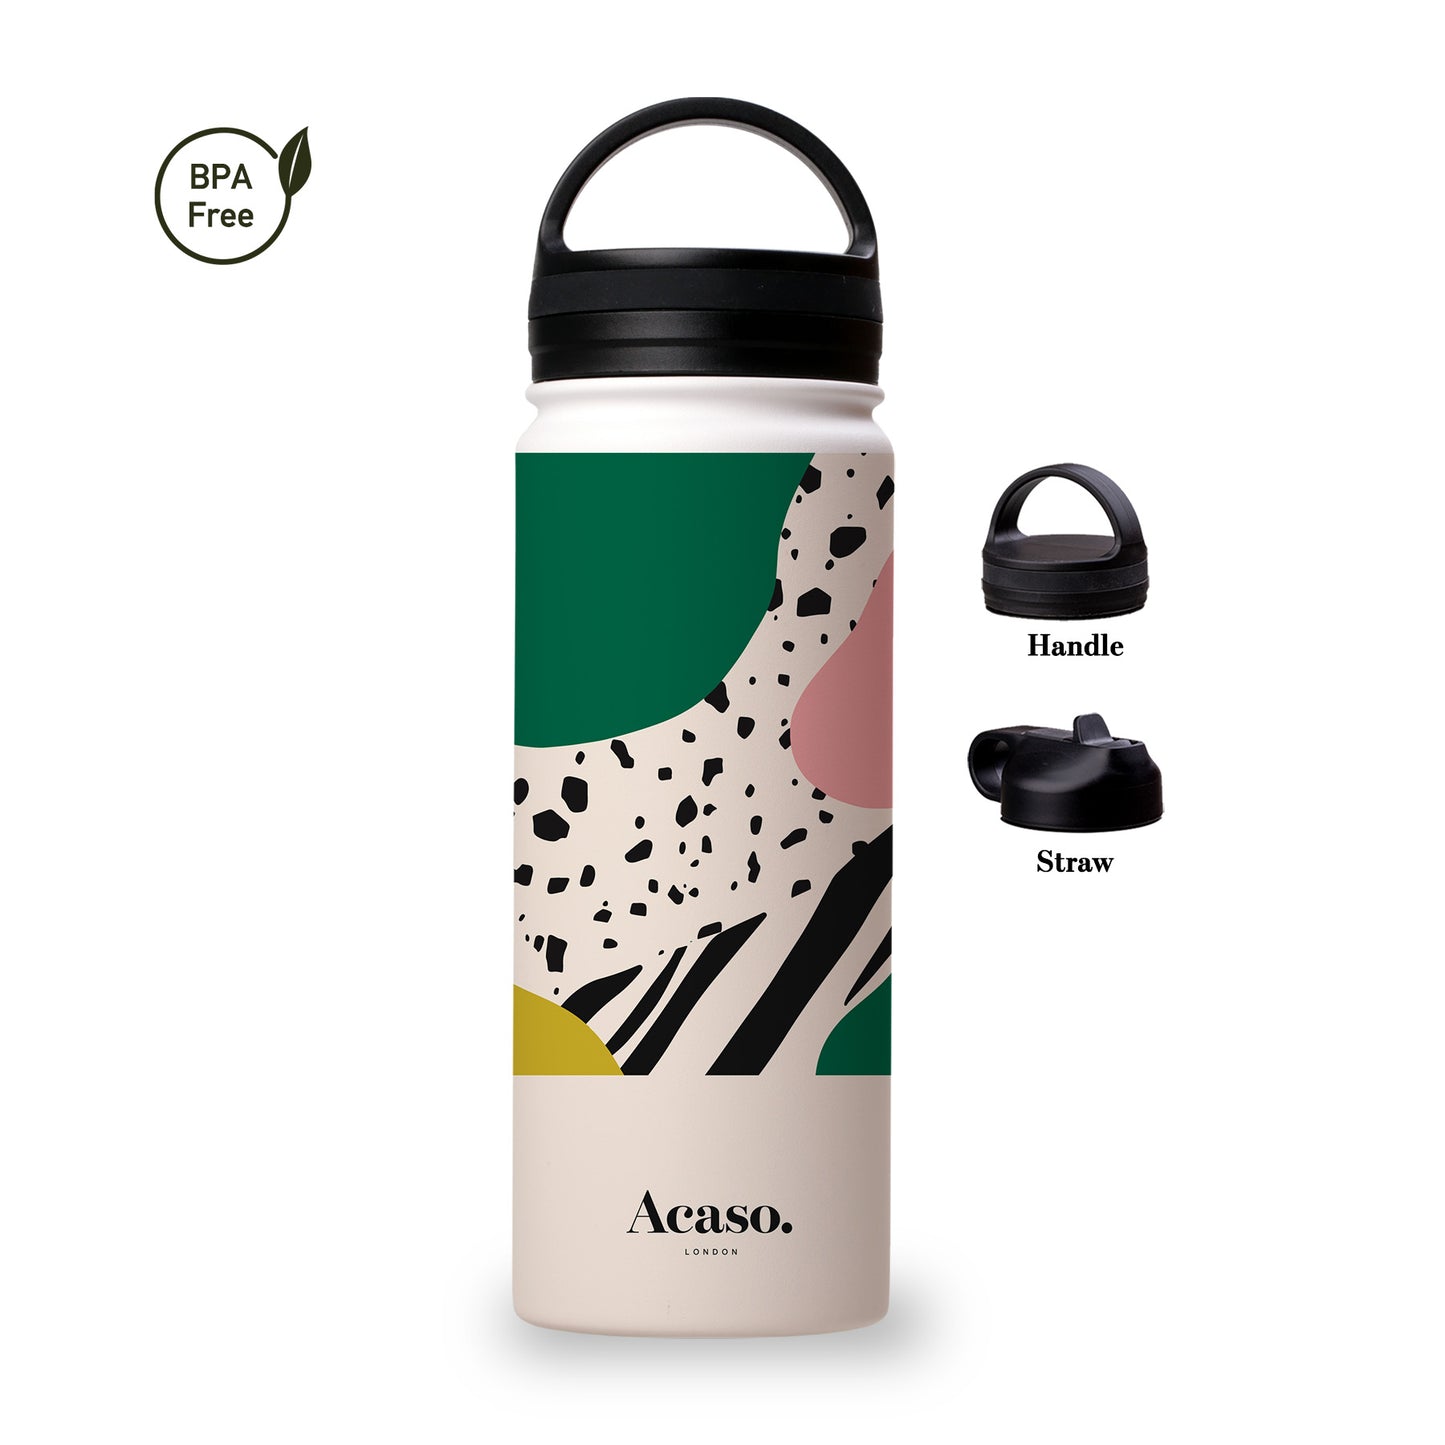 ABSTRACT CRAFTED Art Steel Water Bottle